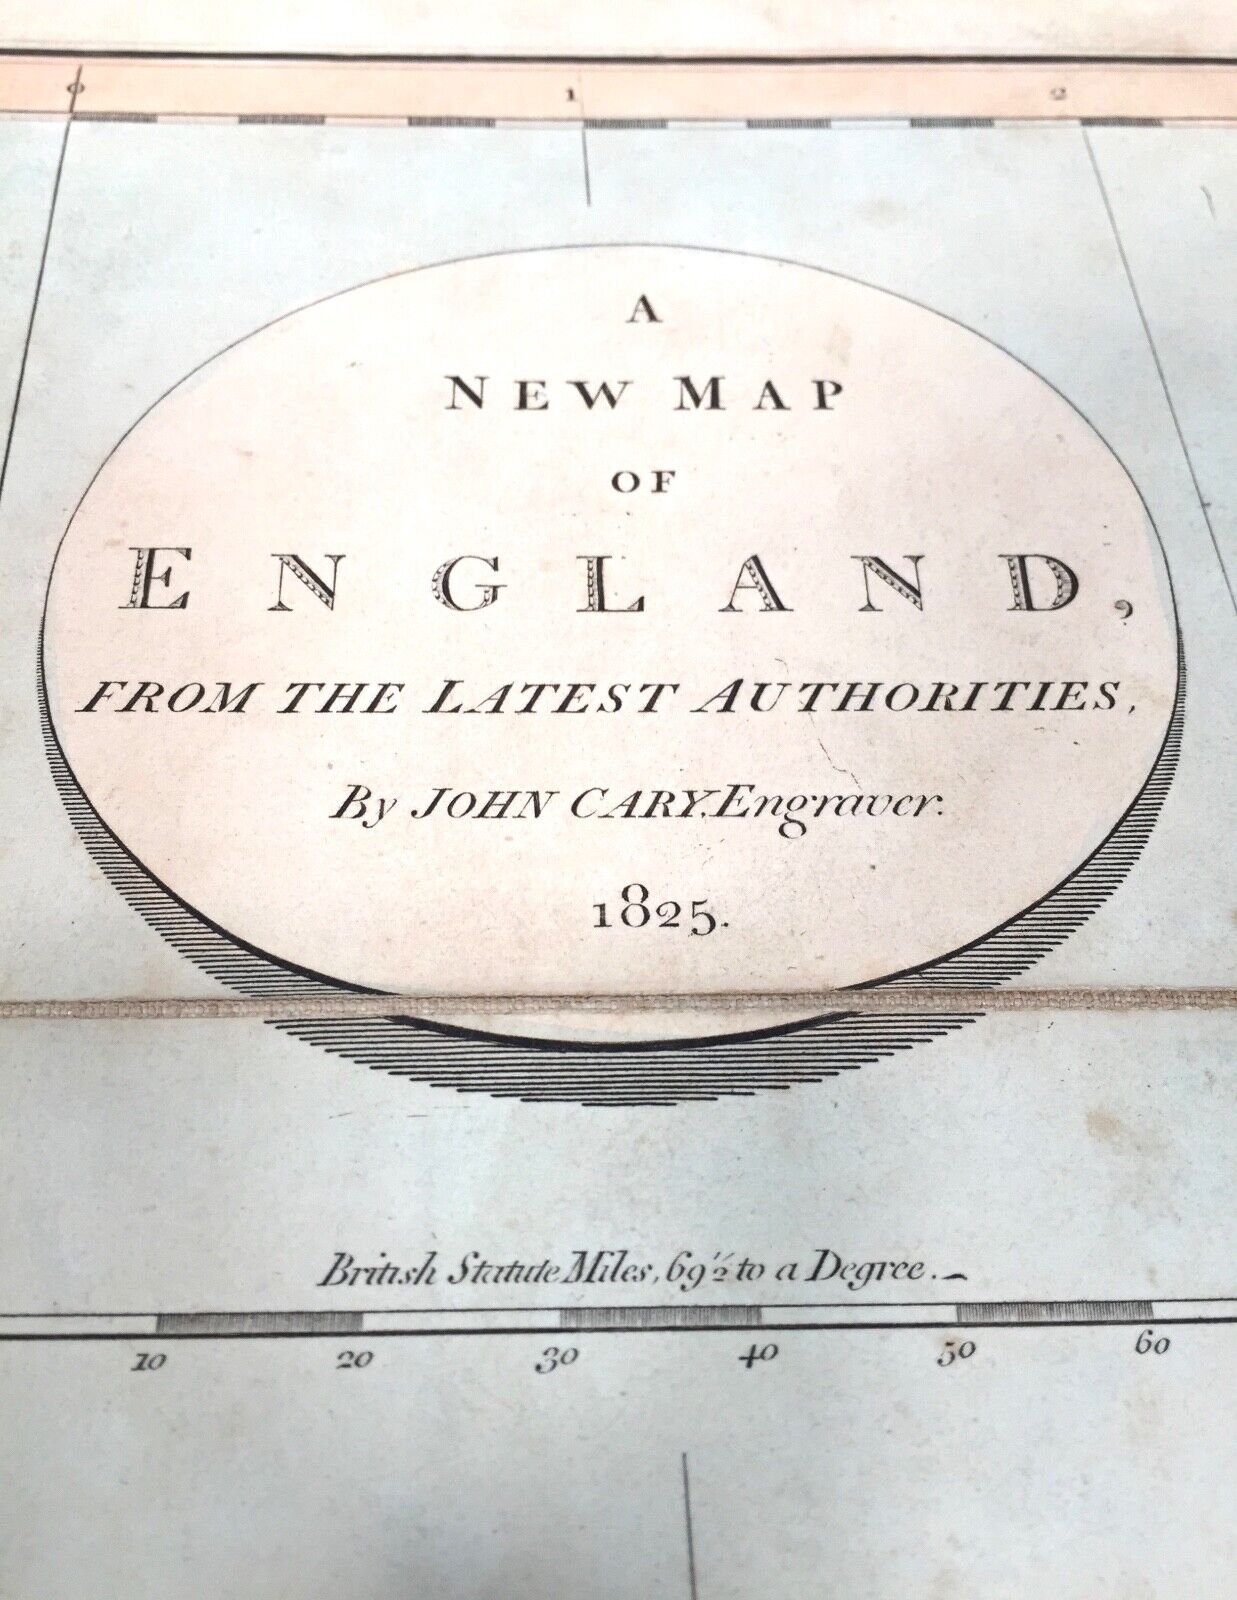 A New Map of England From The Latest Authorities By John Cary / Antique 1825